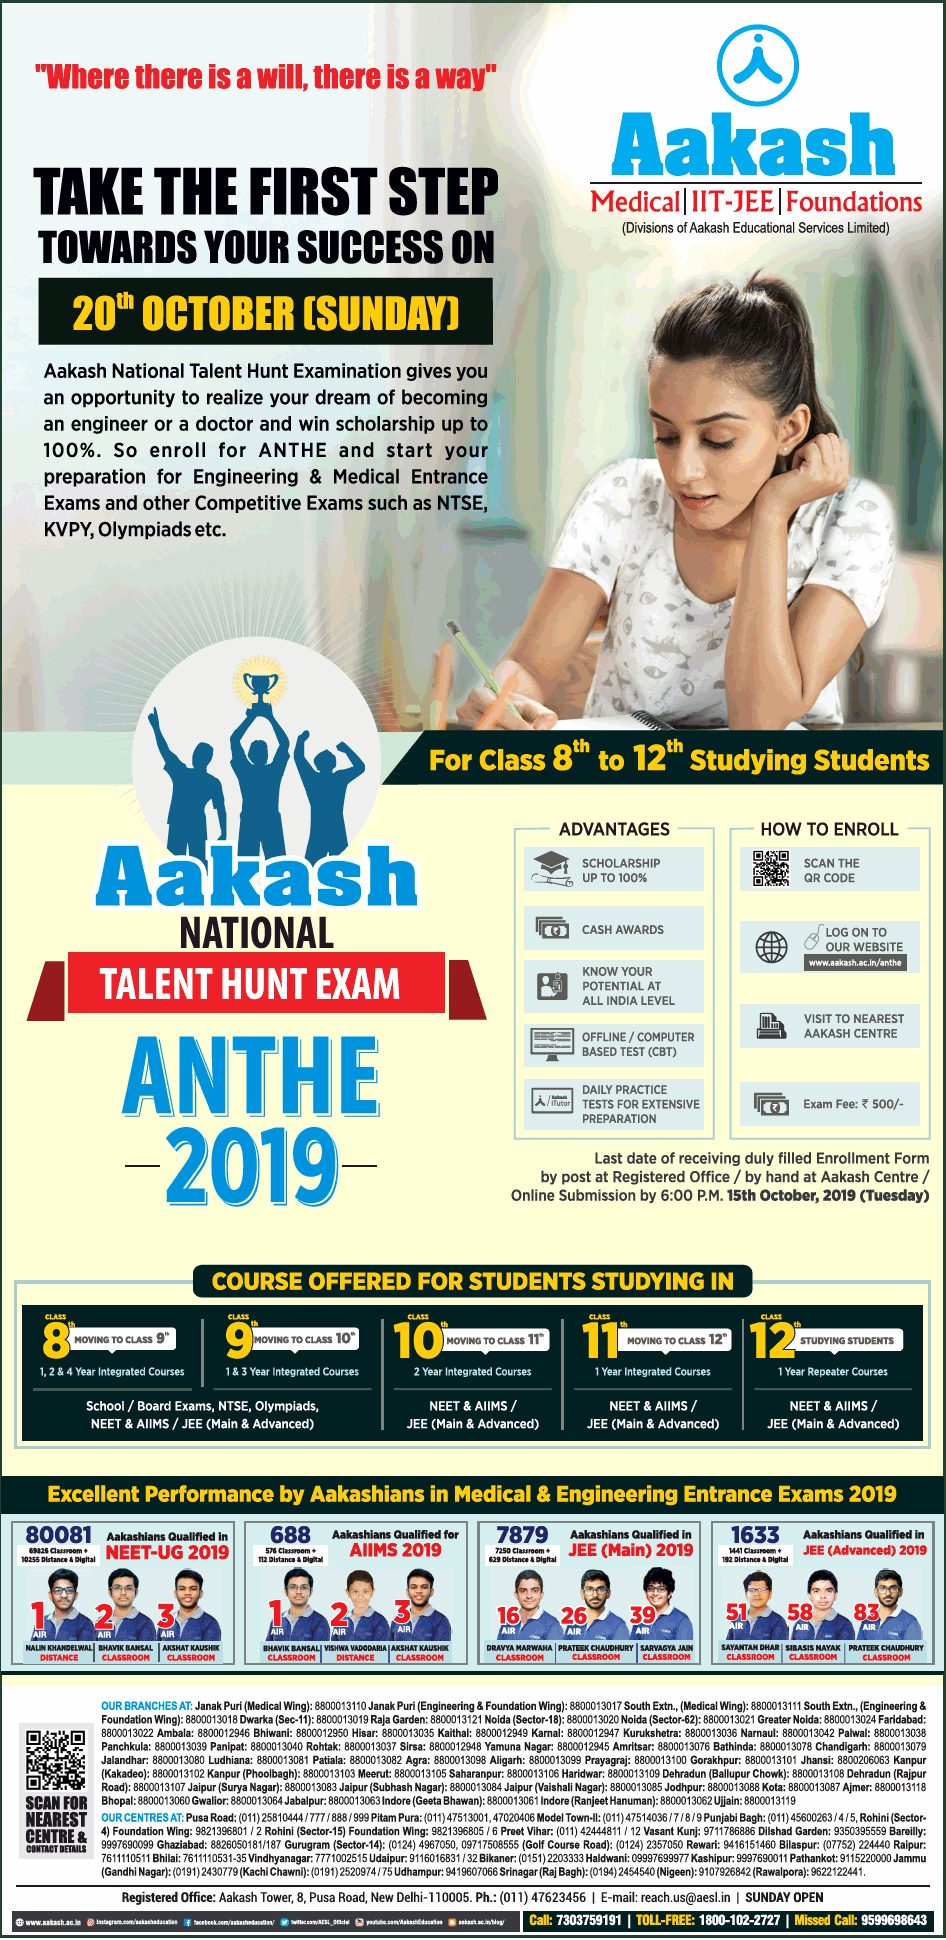 aakash-institute-iit-jee-ad-times-of-india-delhi-06-09-2019.png